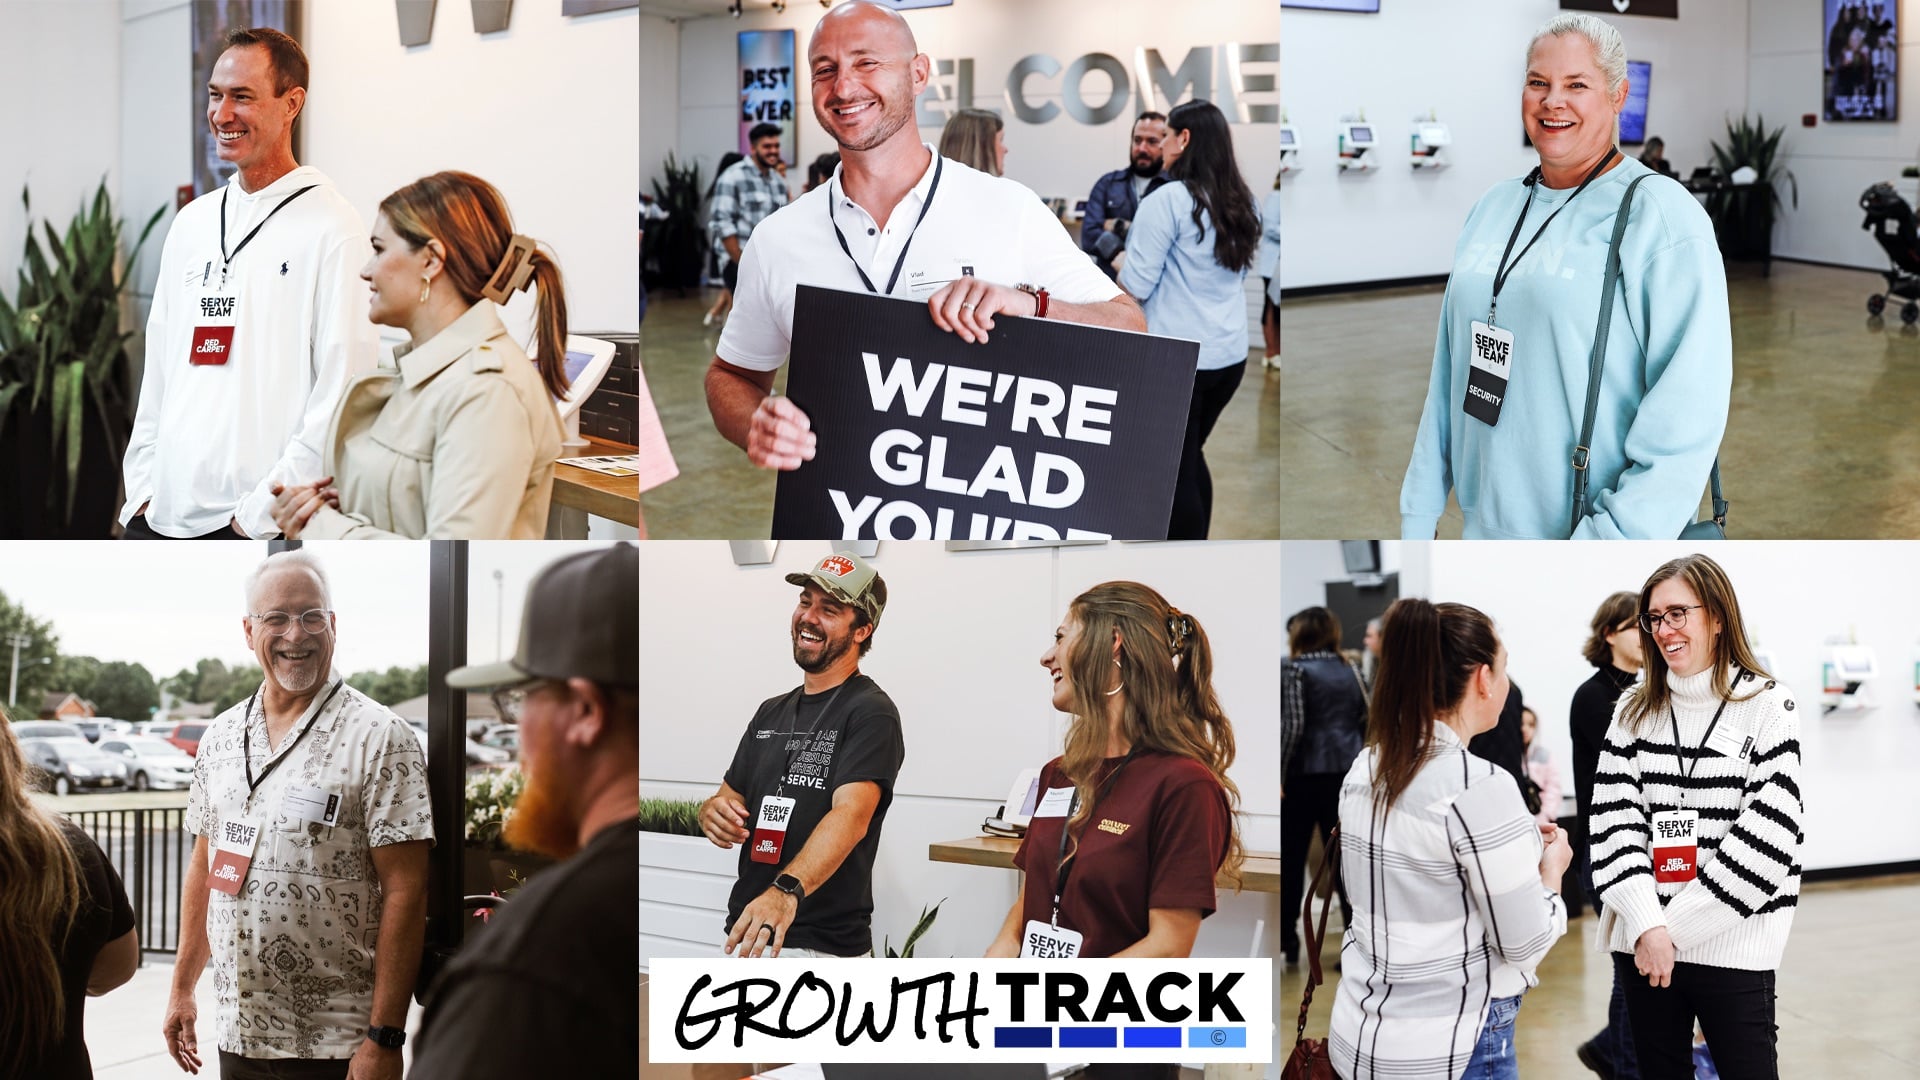 Growth Track Serving